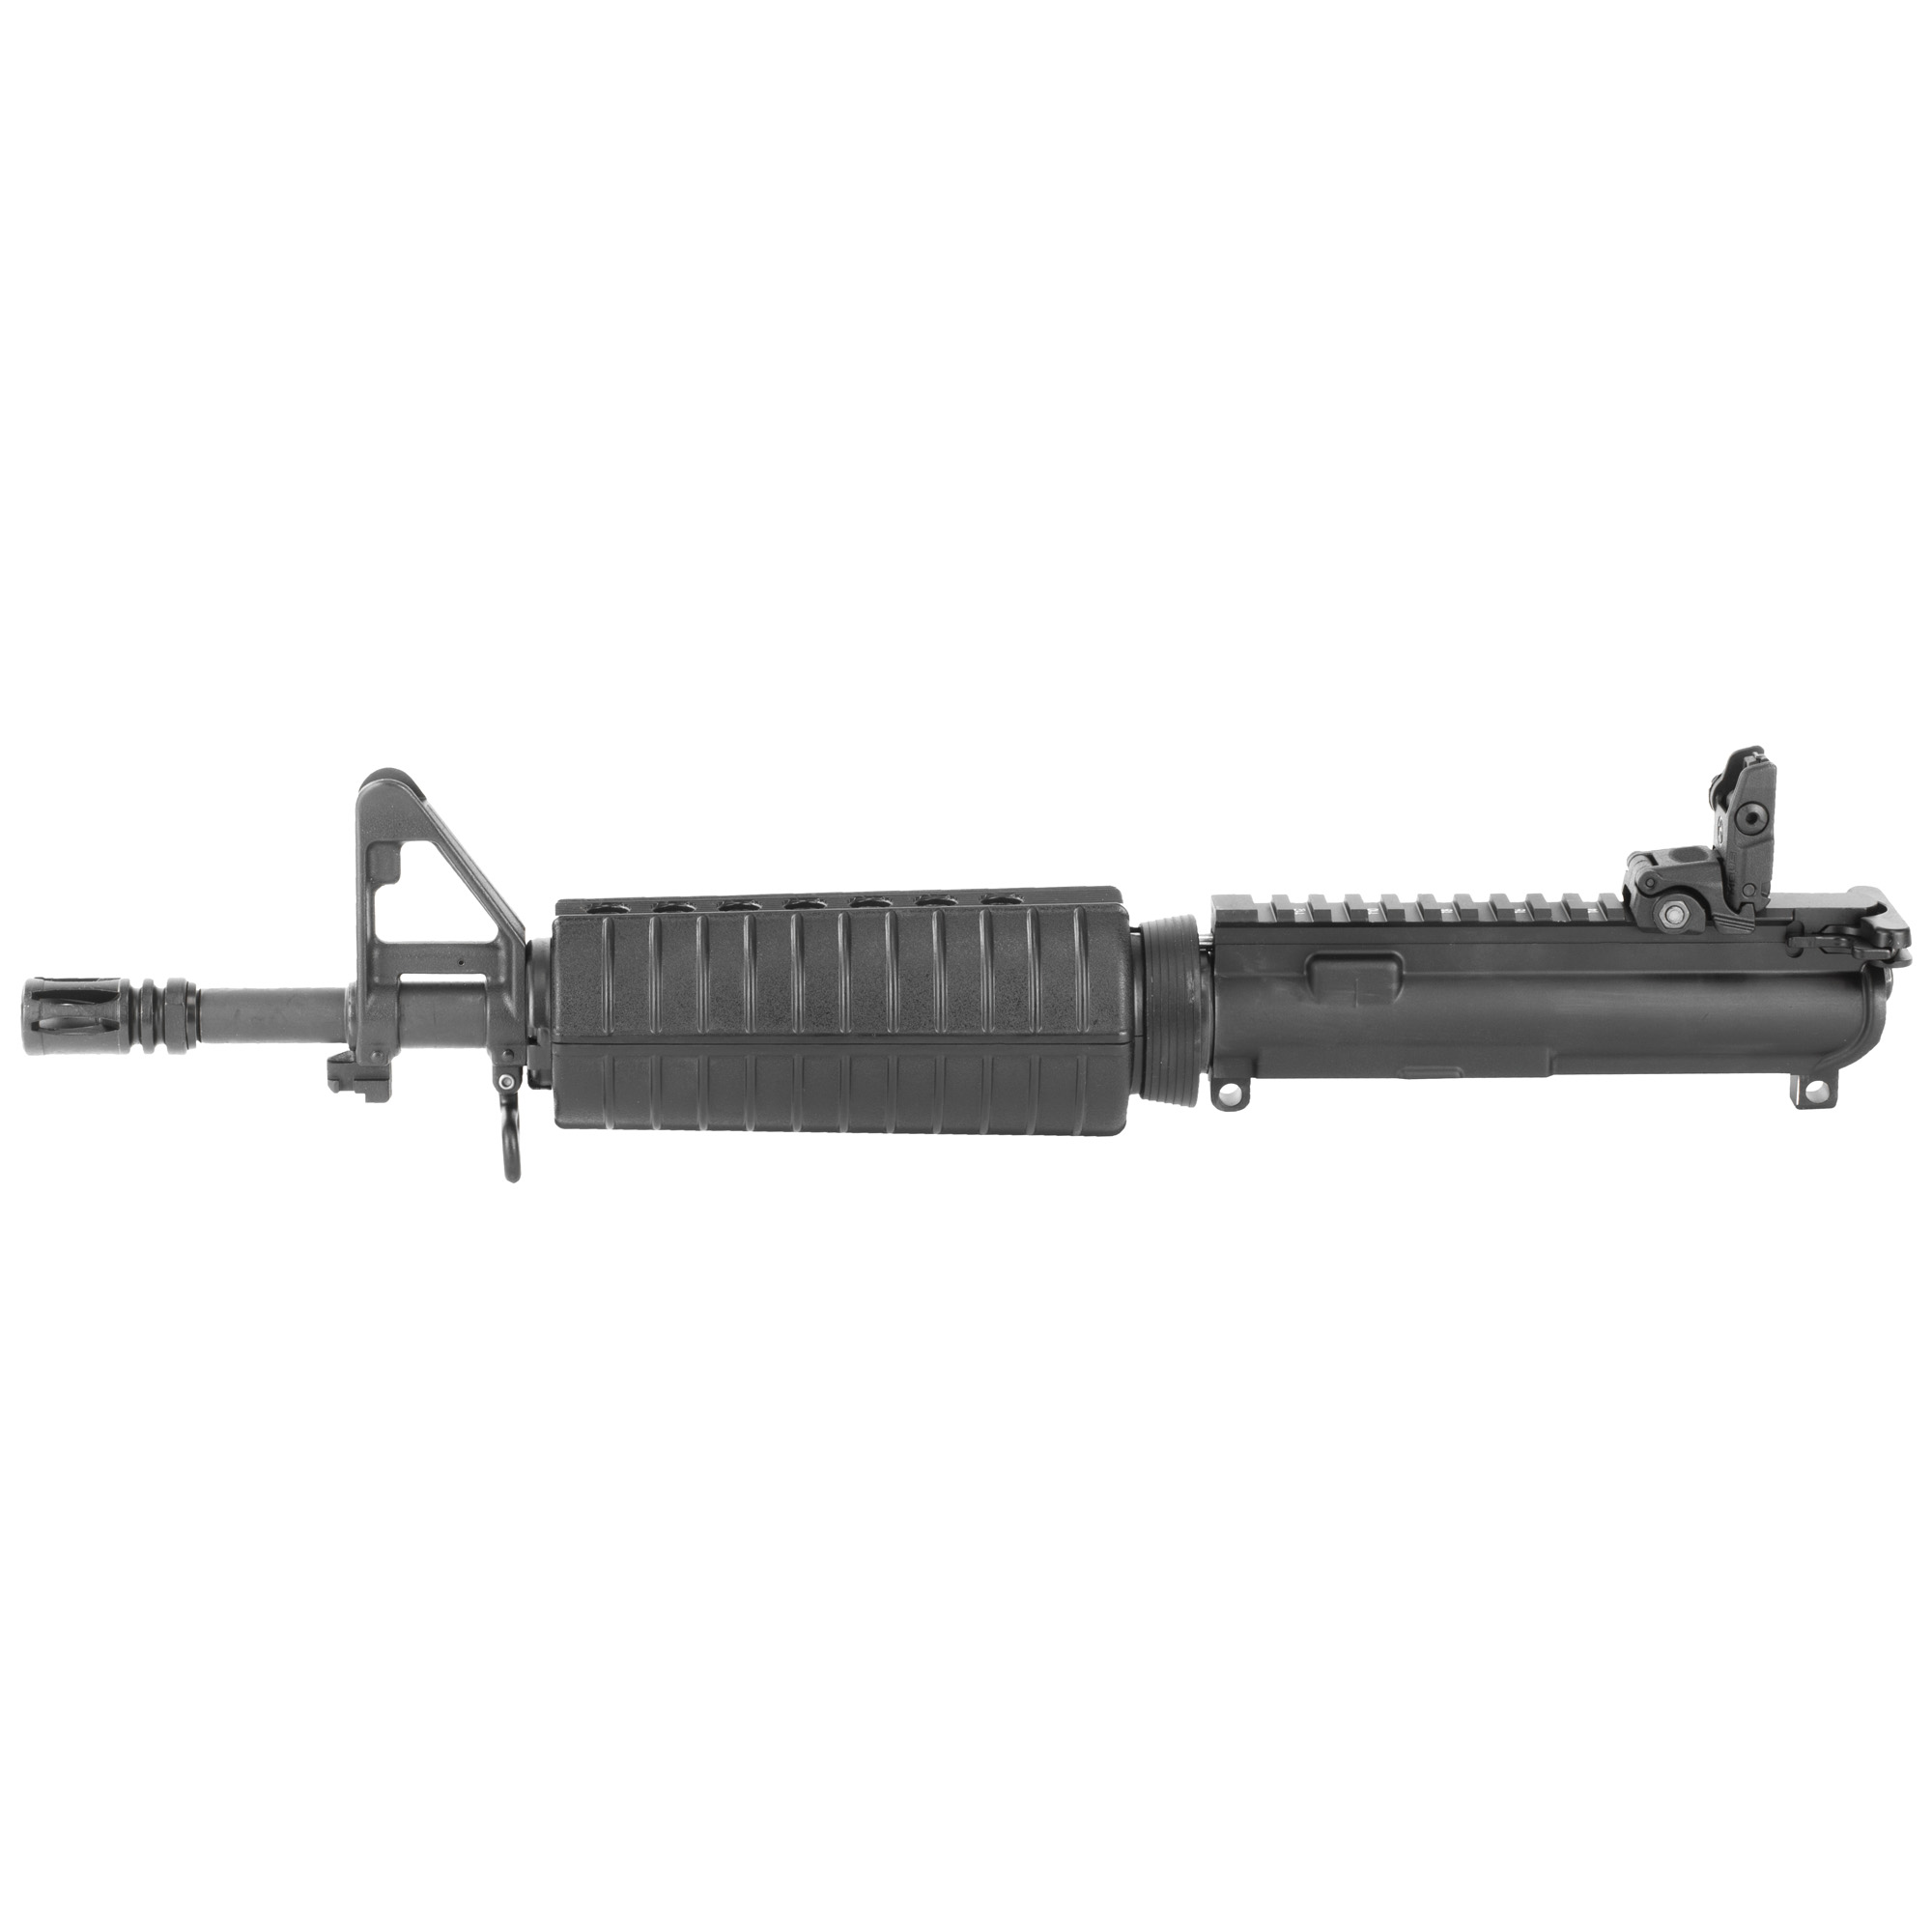 Colt 11.5 inch M4 LW Upper Receiver Assembly